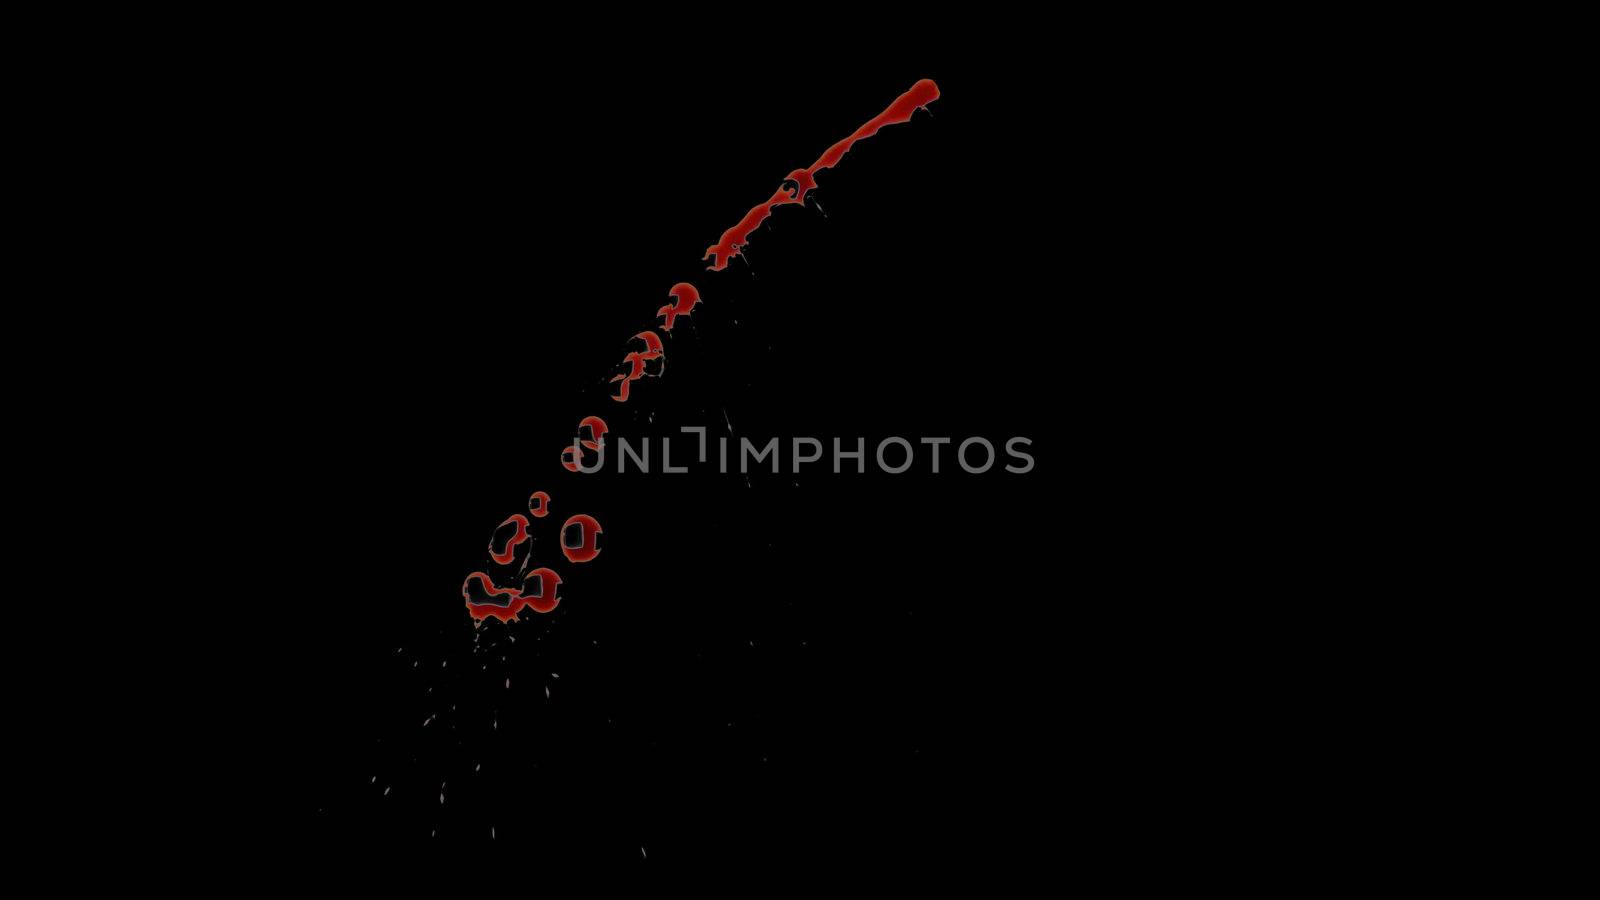 Blood Trail on the Transparent Background with Alpha Channel. Easy use in motion design 4K